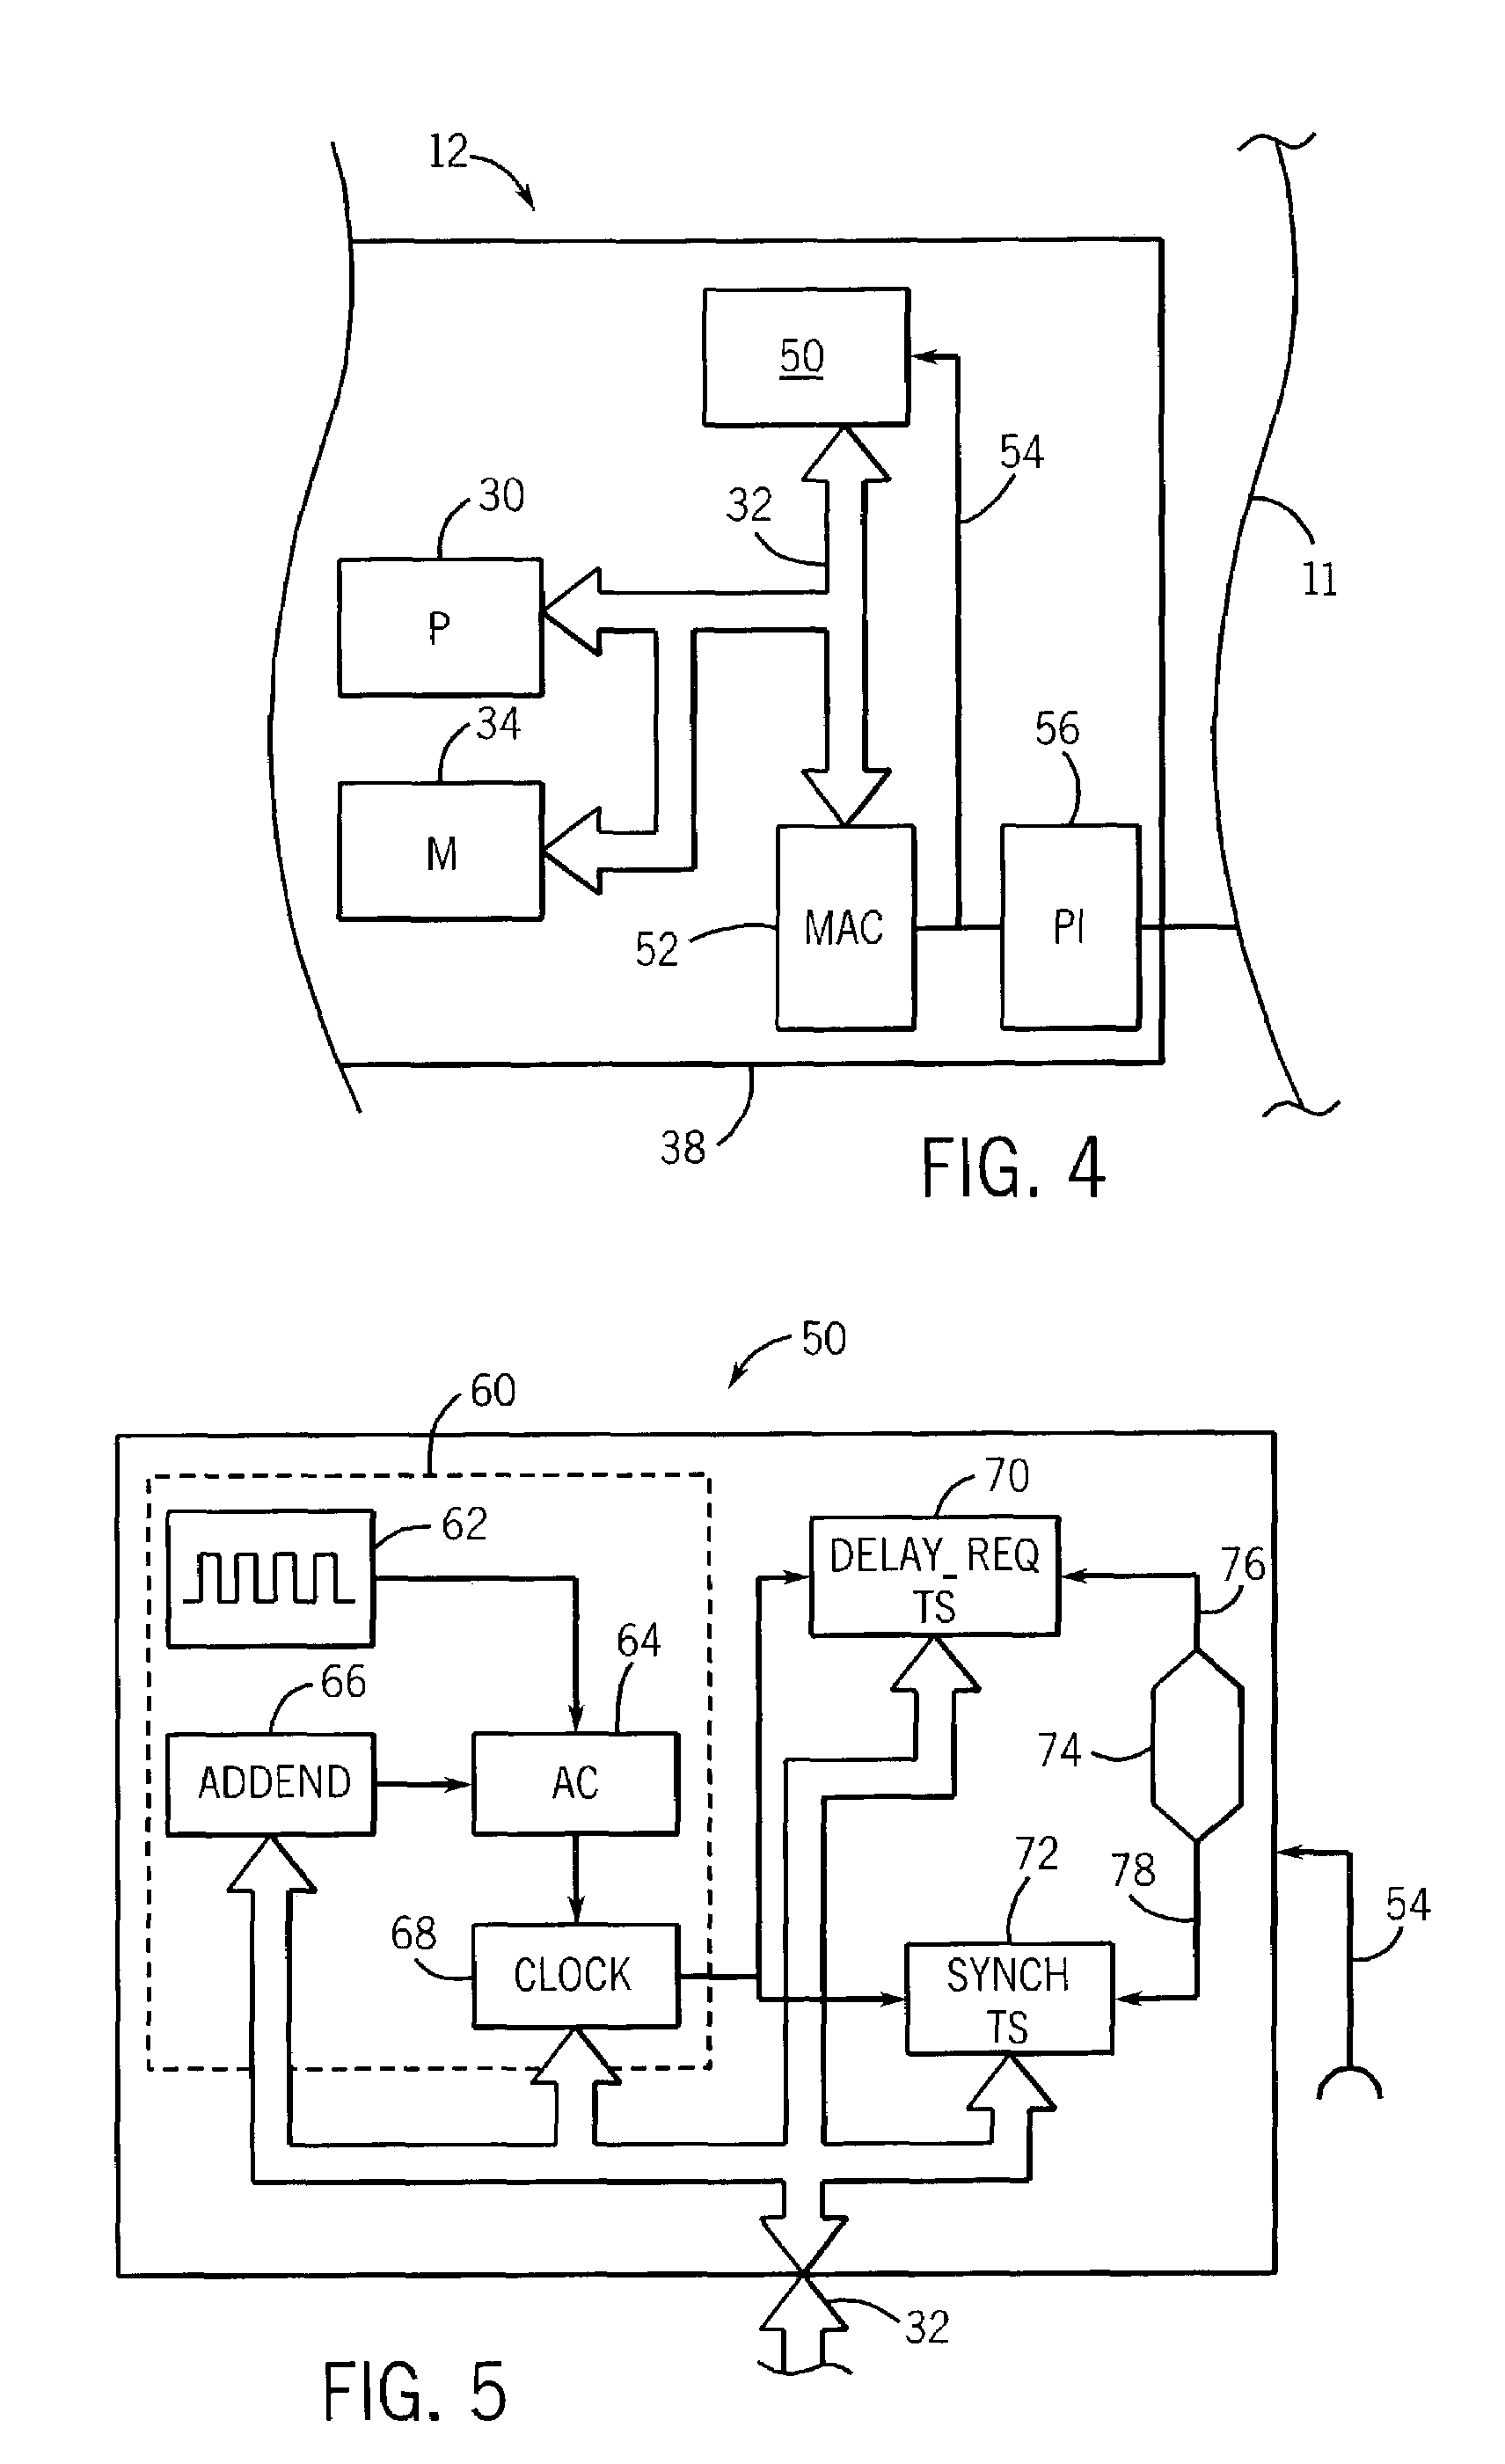 Fast frequency adjustment method for synchronizing network clocks